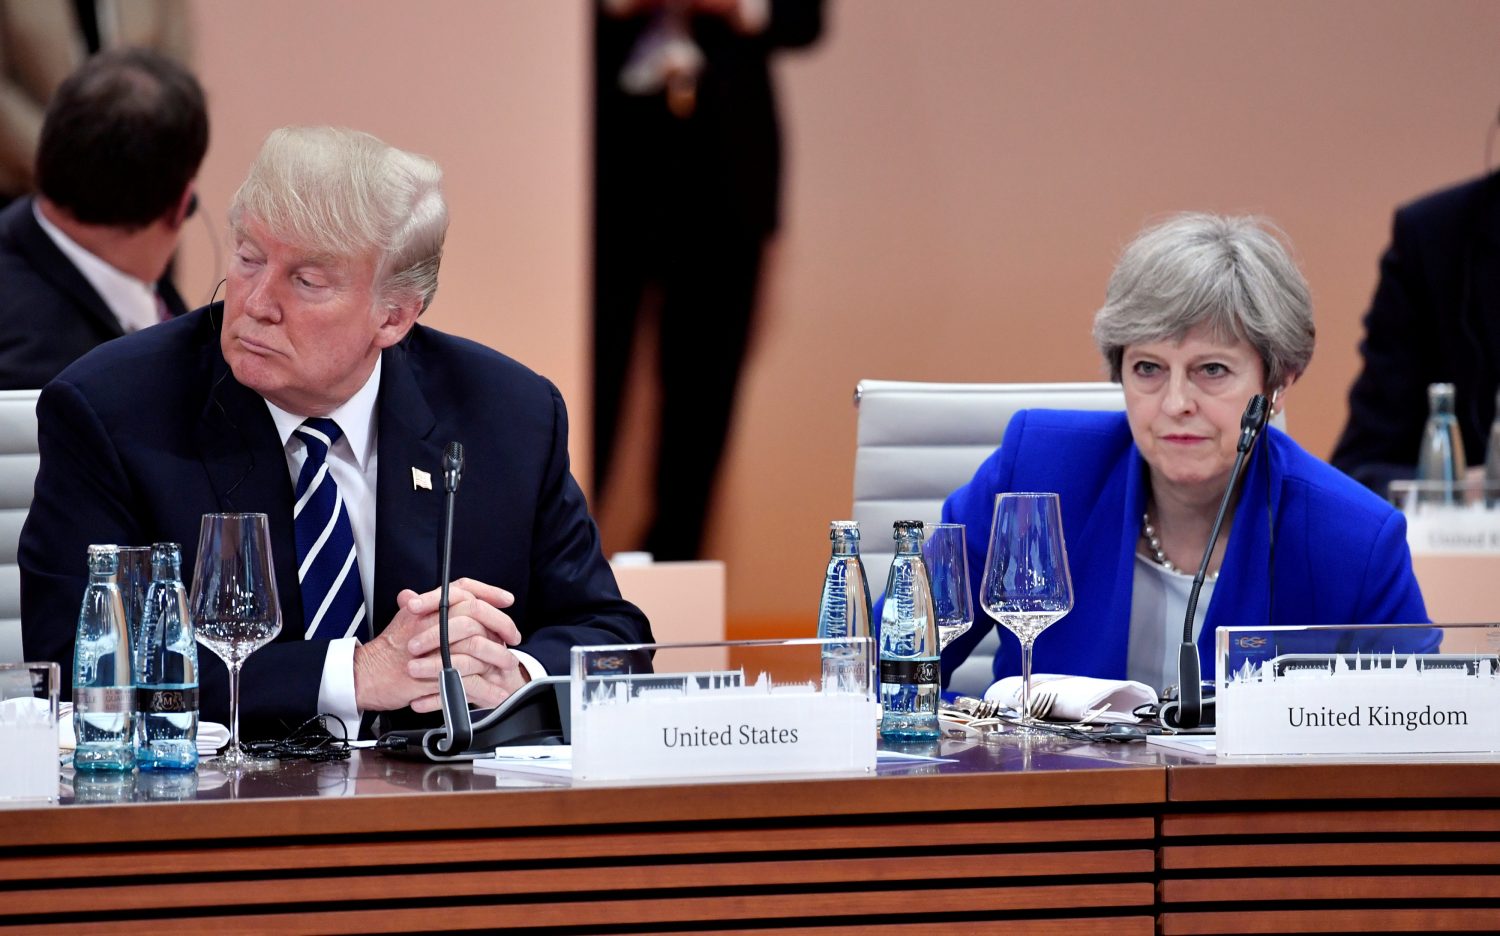 FILE PHOTO: US President Donald Trump and Britain’s Prime Minister Theresa May wait at the start of the first working session of the G20 meeting in Hamburg, Germany, July 7, 2017. REUTERS/John MACDOUGALL/Pool/File Photo